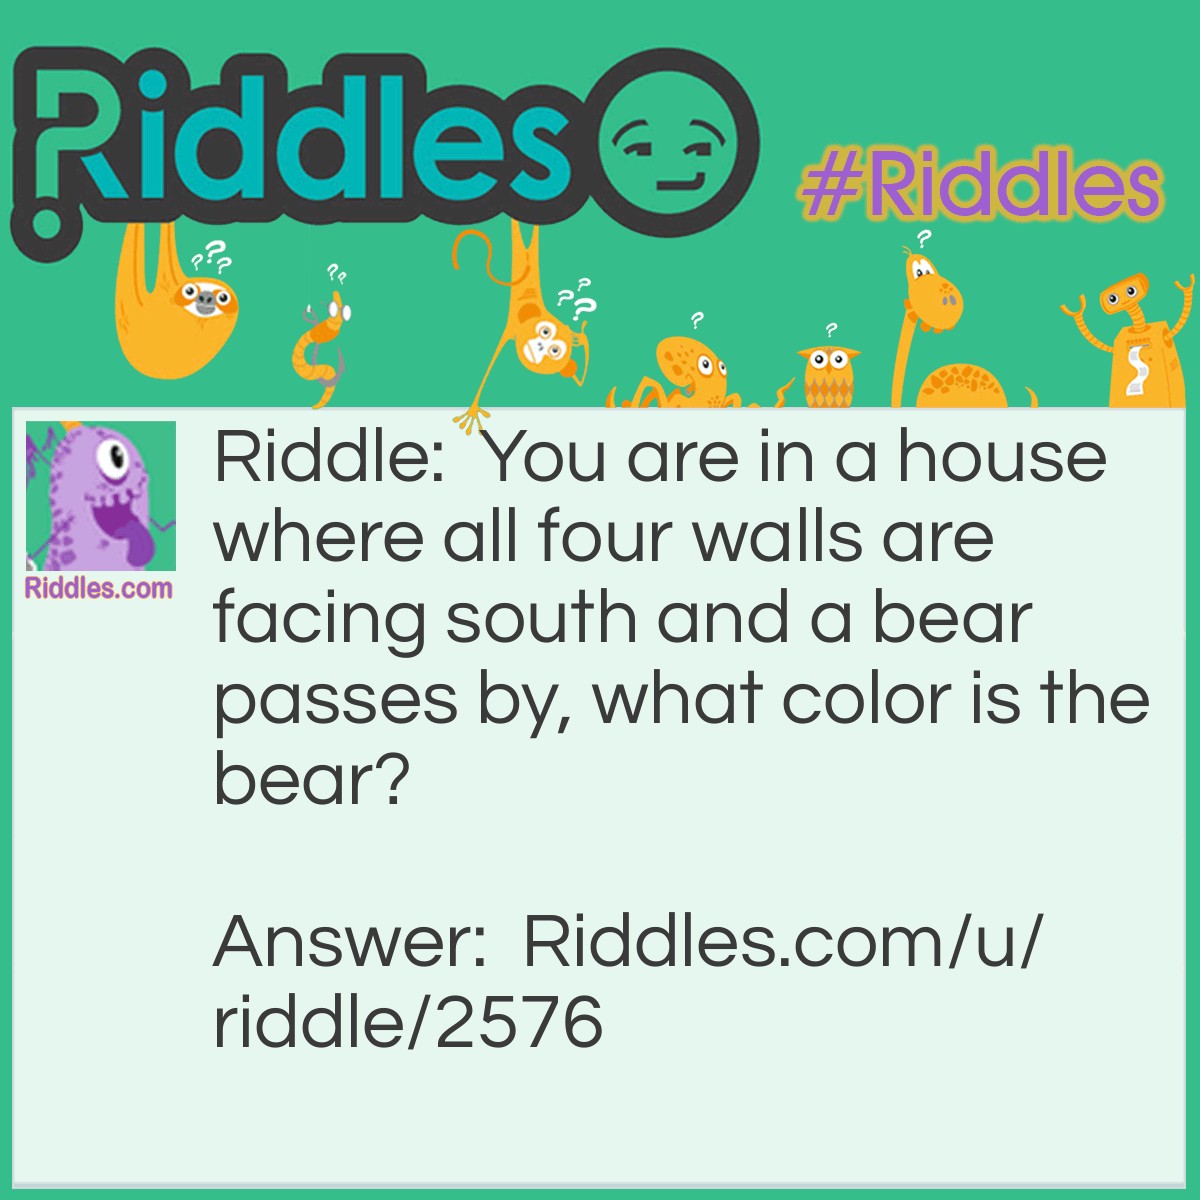 Riddle: You are in a house where all four walls are facing south and a bear passes by, what color is the bear? Answer: White, because you're on the north pole and it's a polar bear.